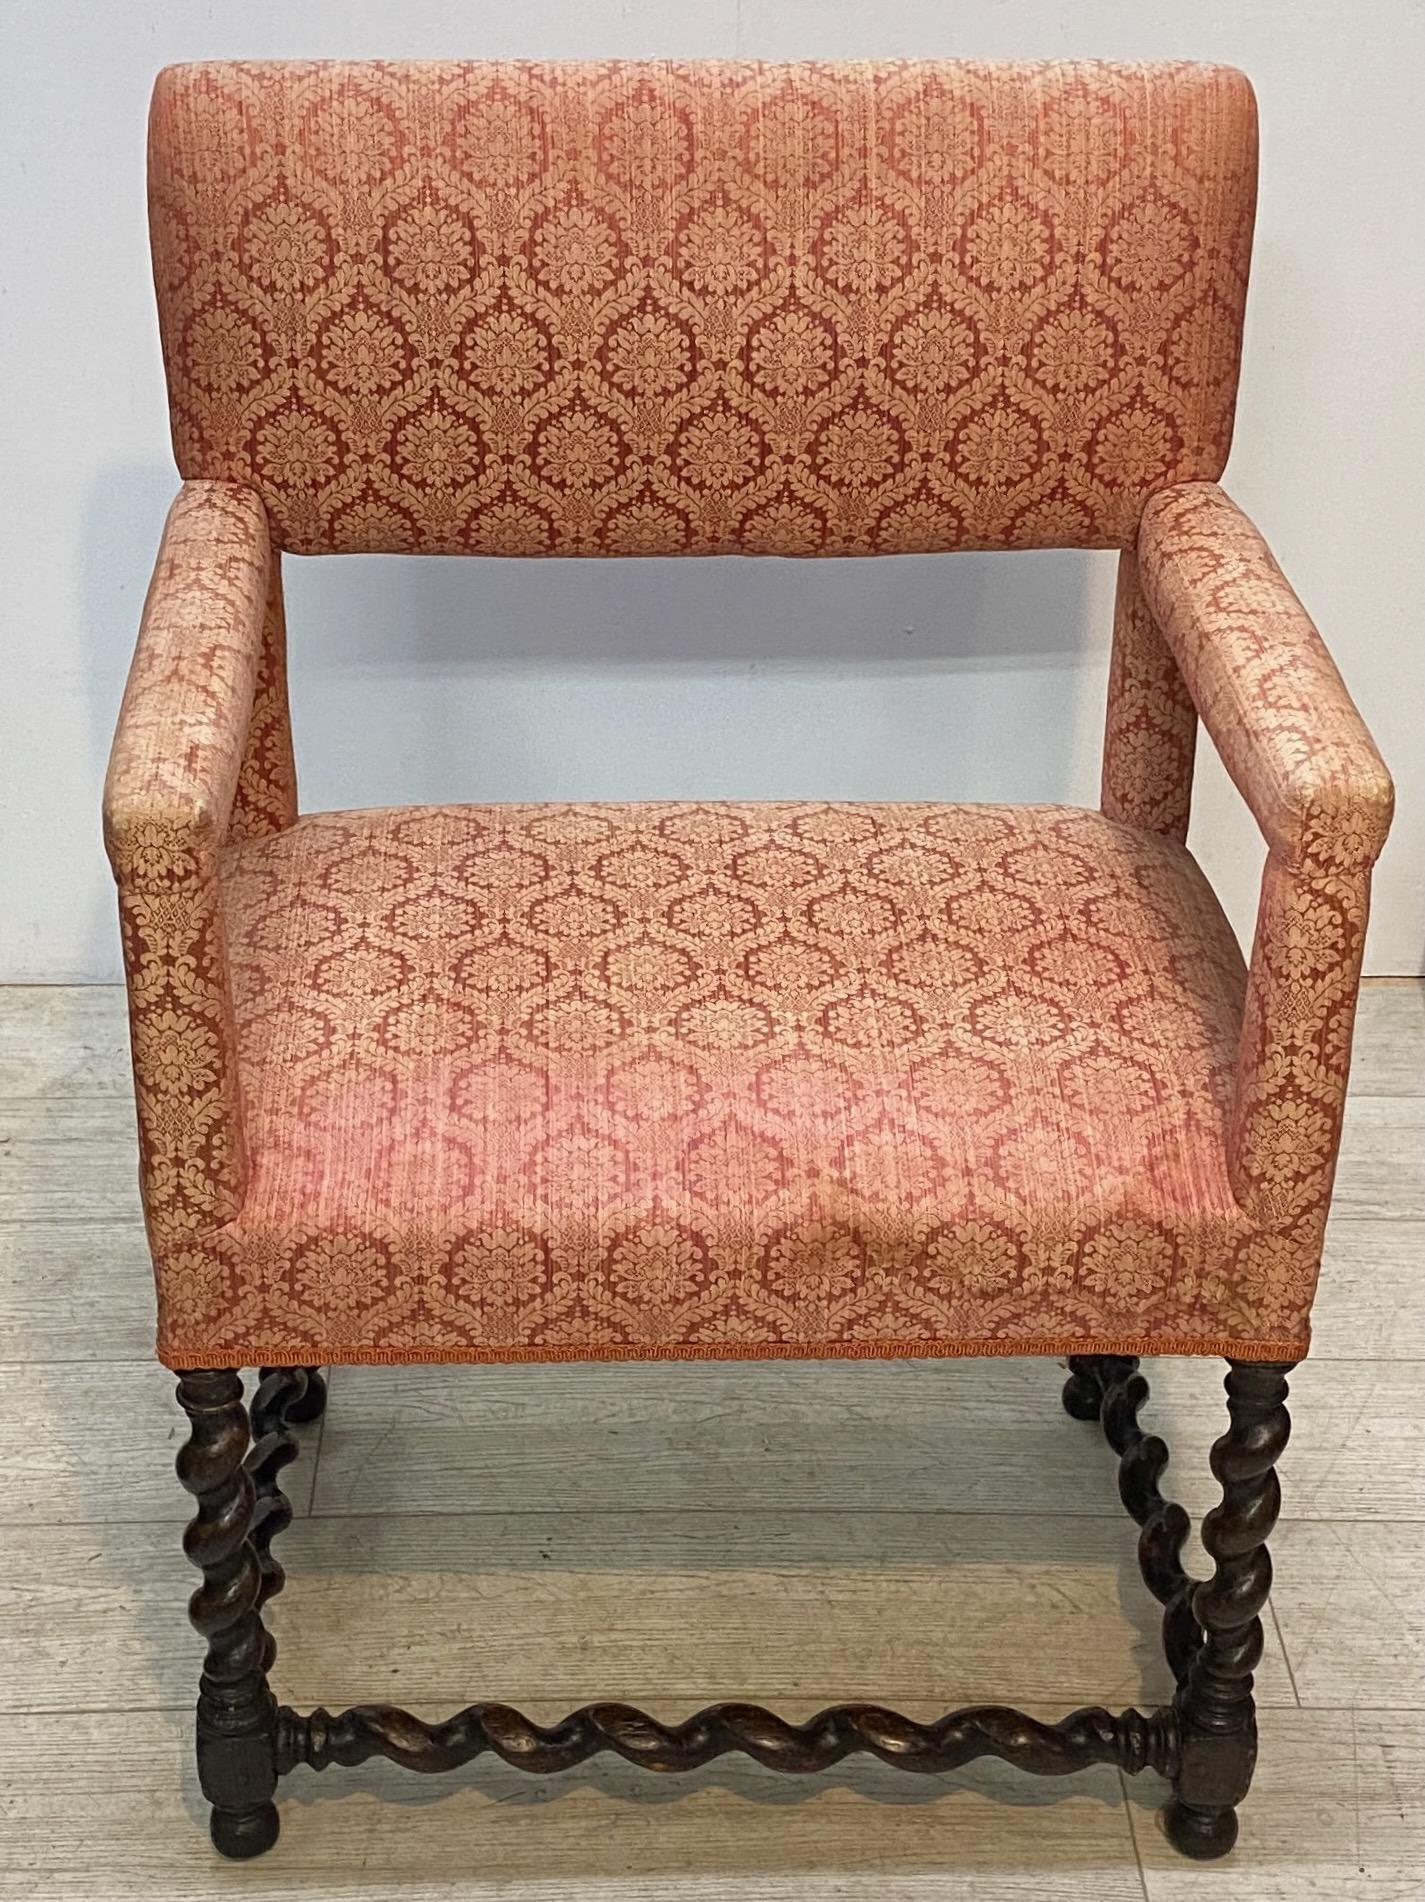 An exceptional example of a period 18th century oak armchair with barley twist legs and stretchers. In unusually good condition. Upholstered in the mid 20th century. Sturdy and strong, but ready for new upholstery. 
England, early 18th century